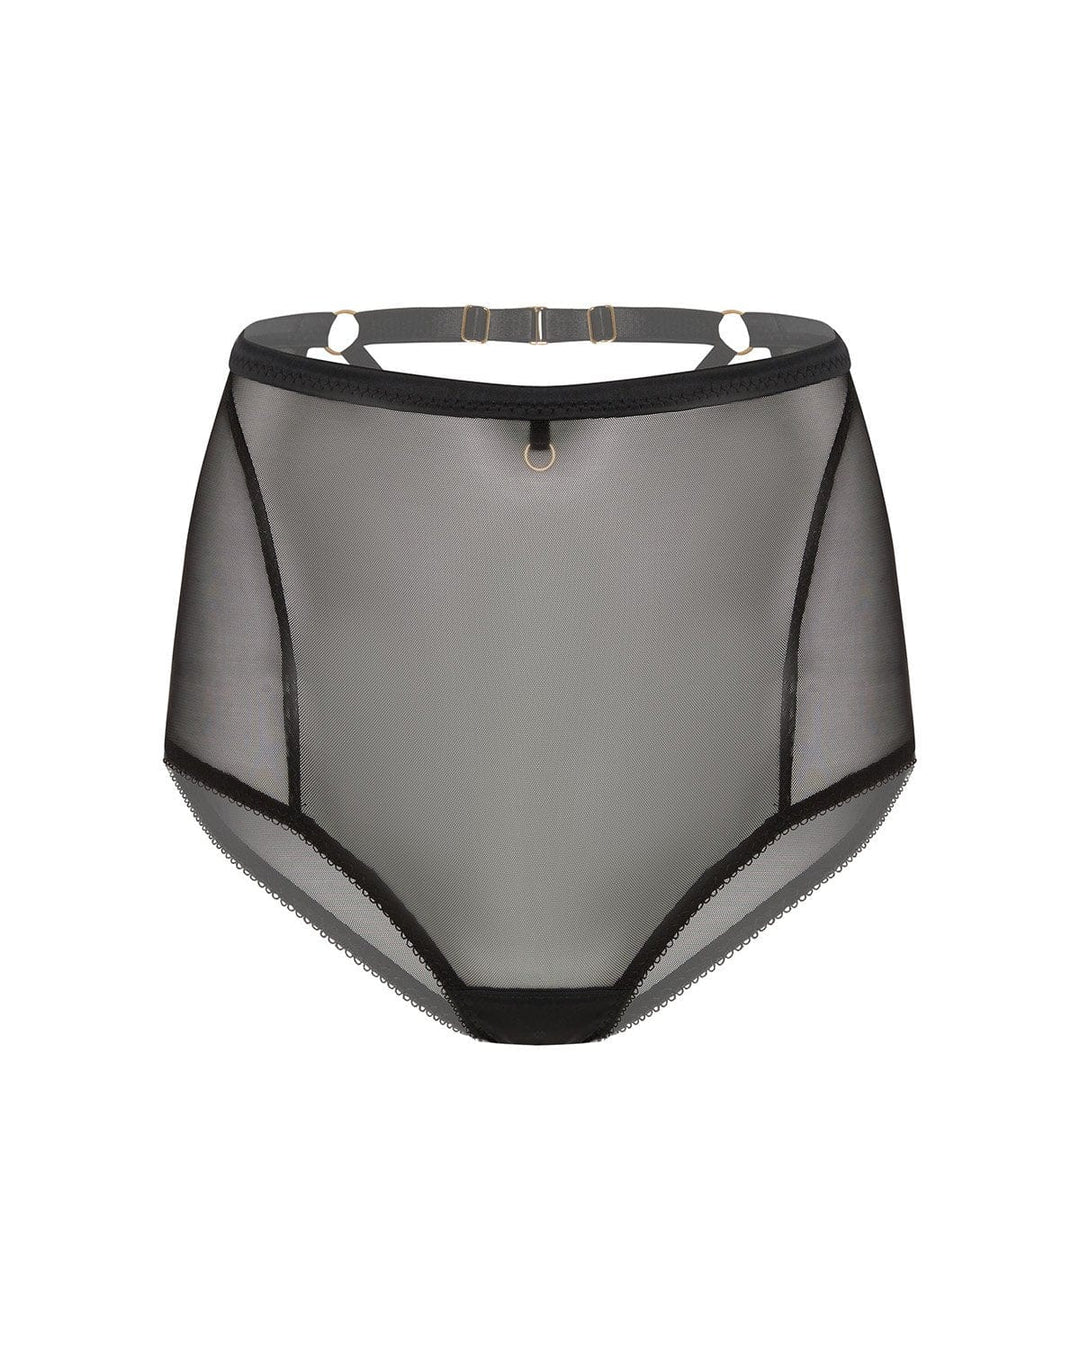 Vivi Leigh London lingerie High Waisted Briefs sexy harness luxury lingerie uk sustainable brand